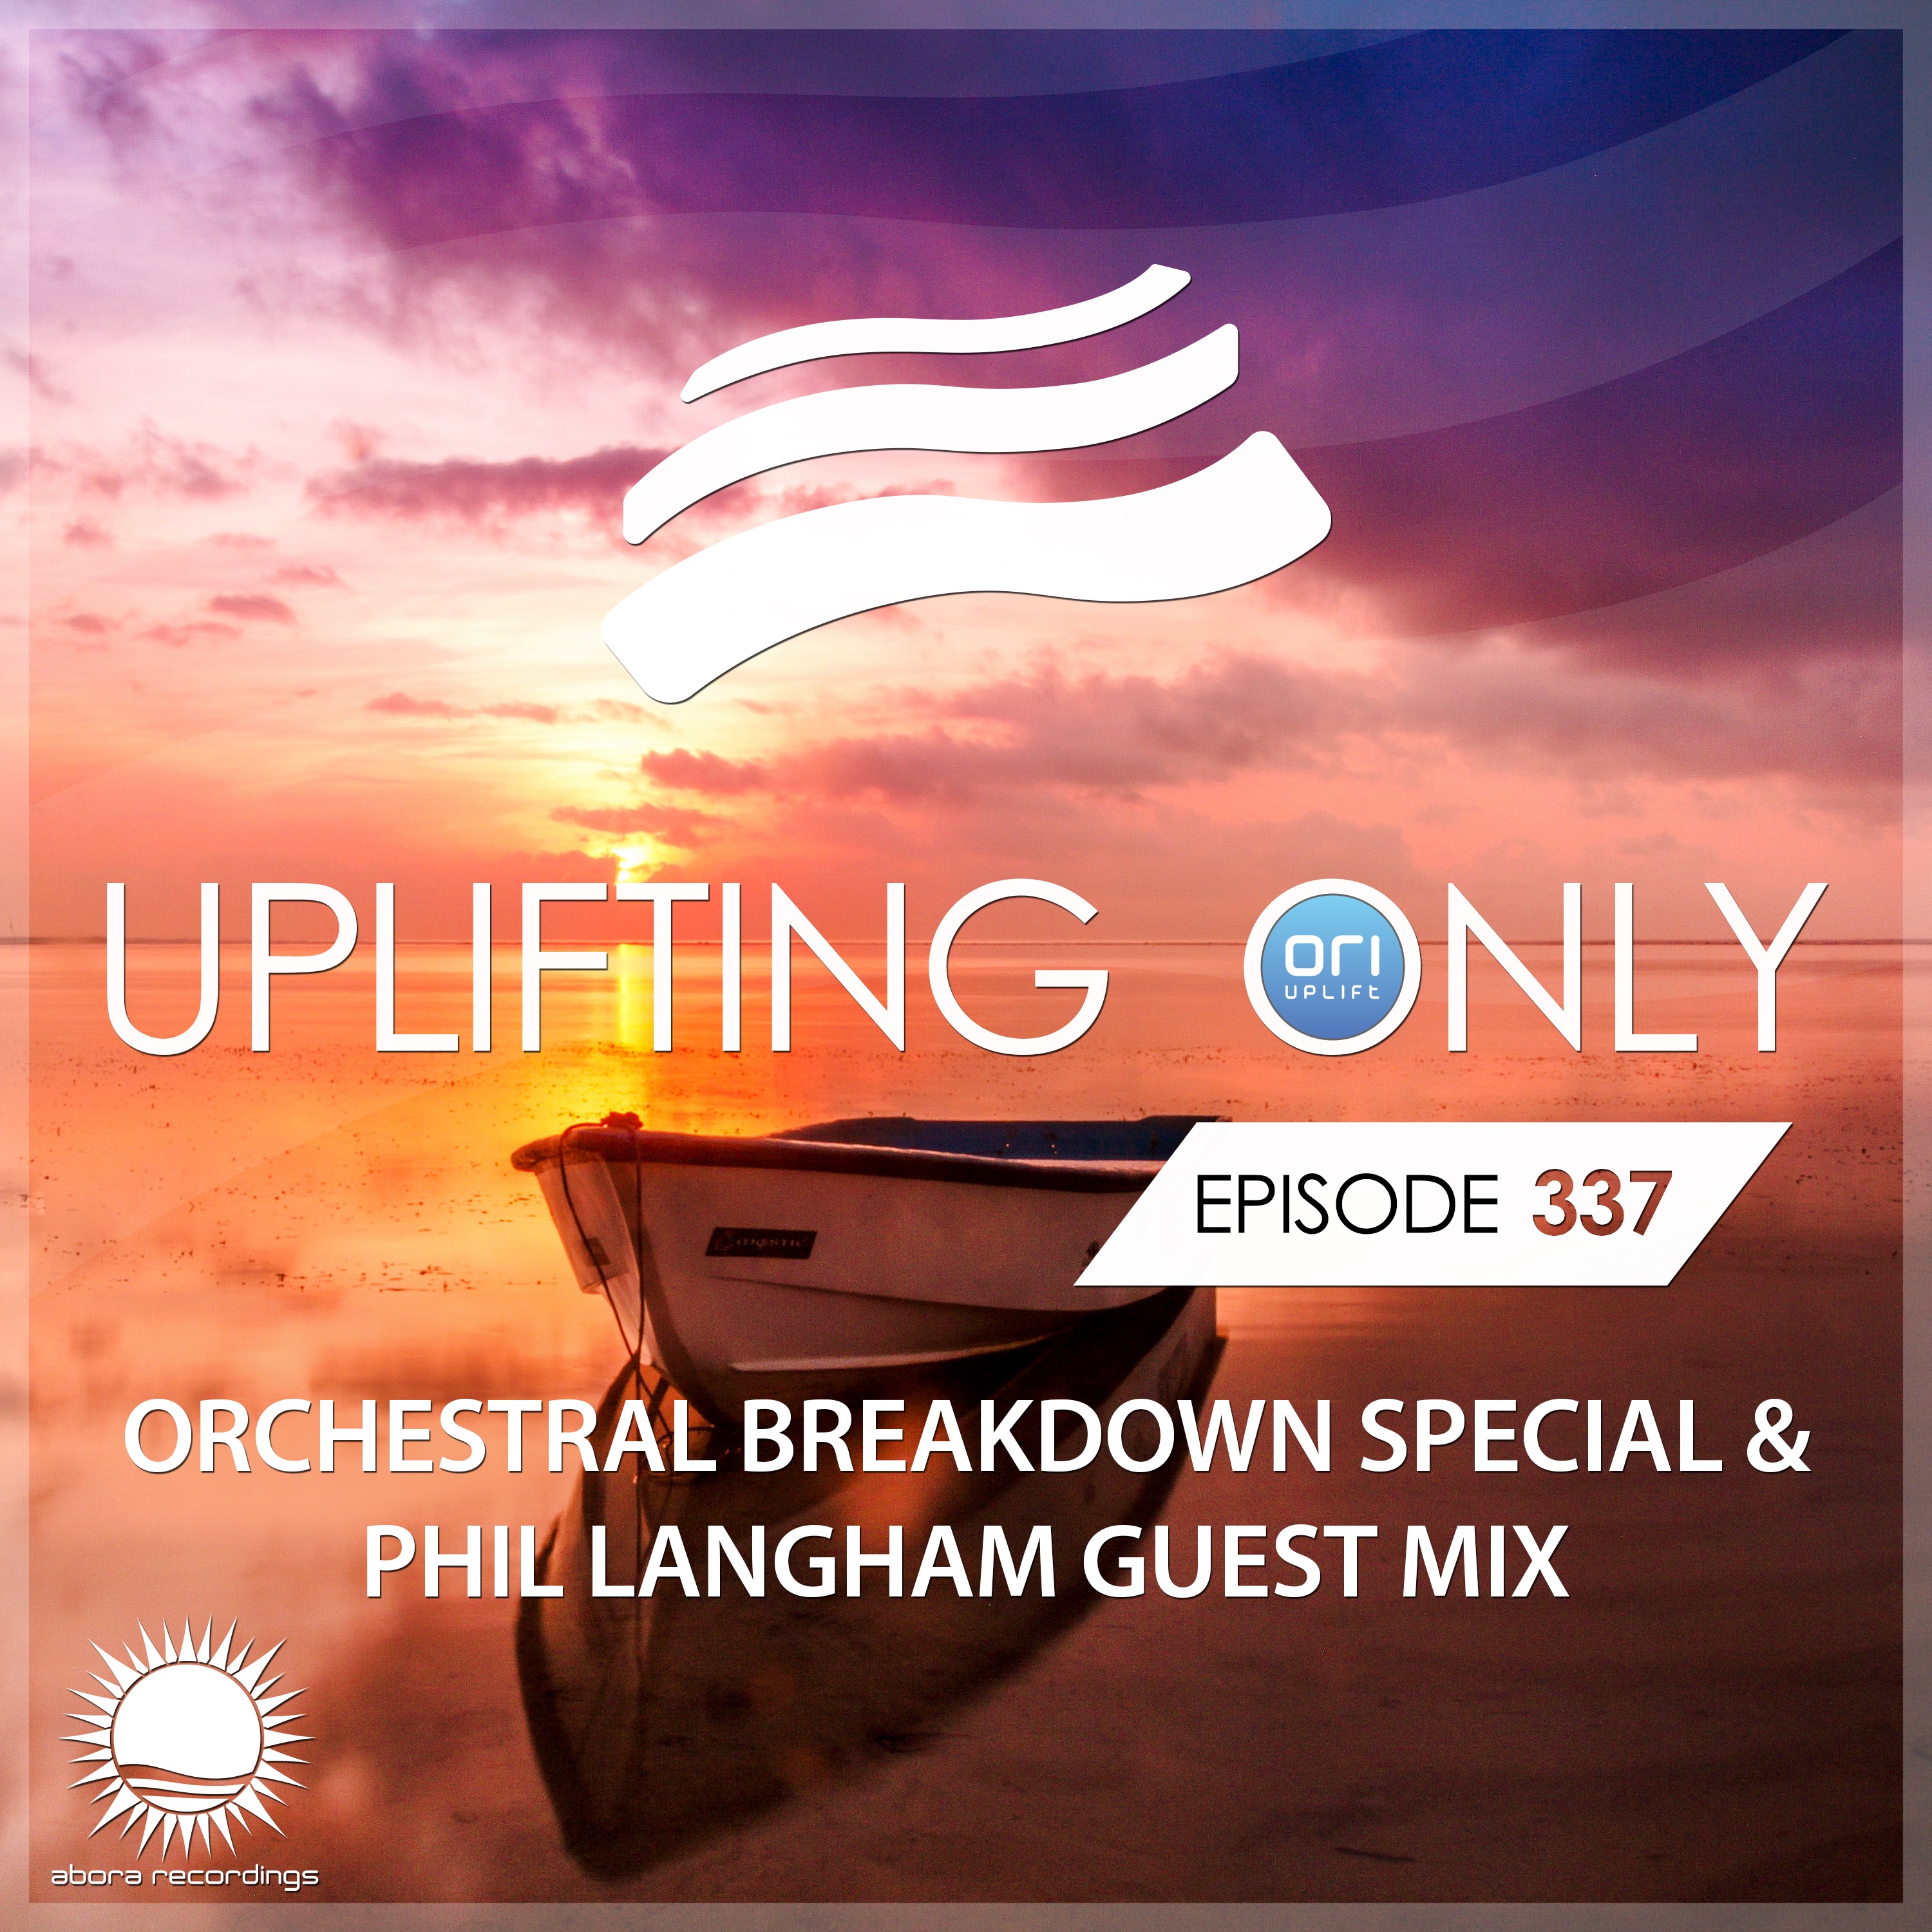 Uplifting. Illitheas & Johannes Fischer - tears of hope. Etasonic when you're gone Sentimental Mix. Only ep